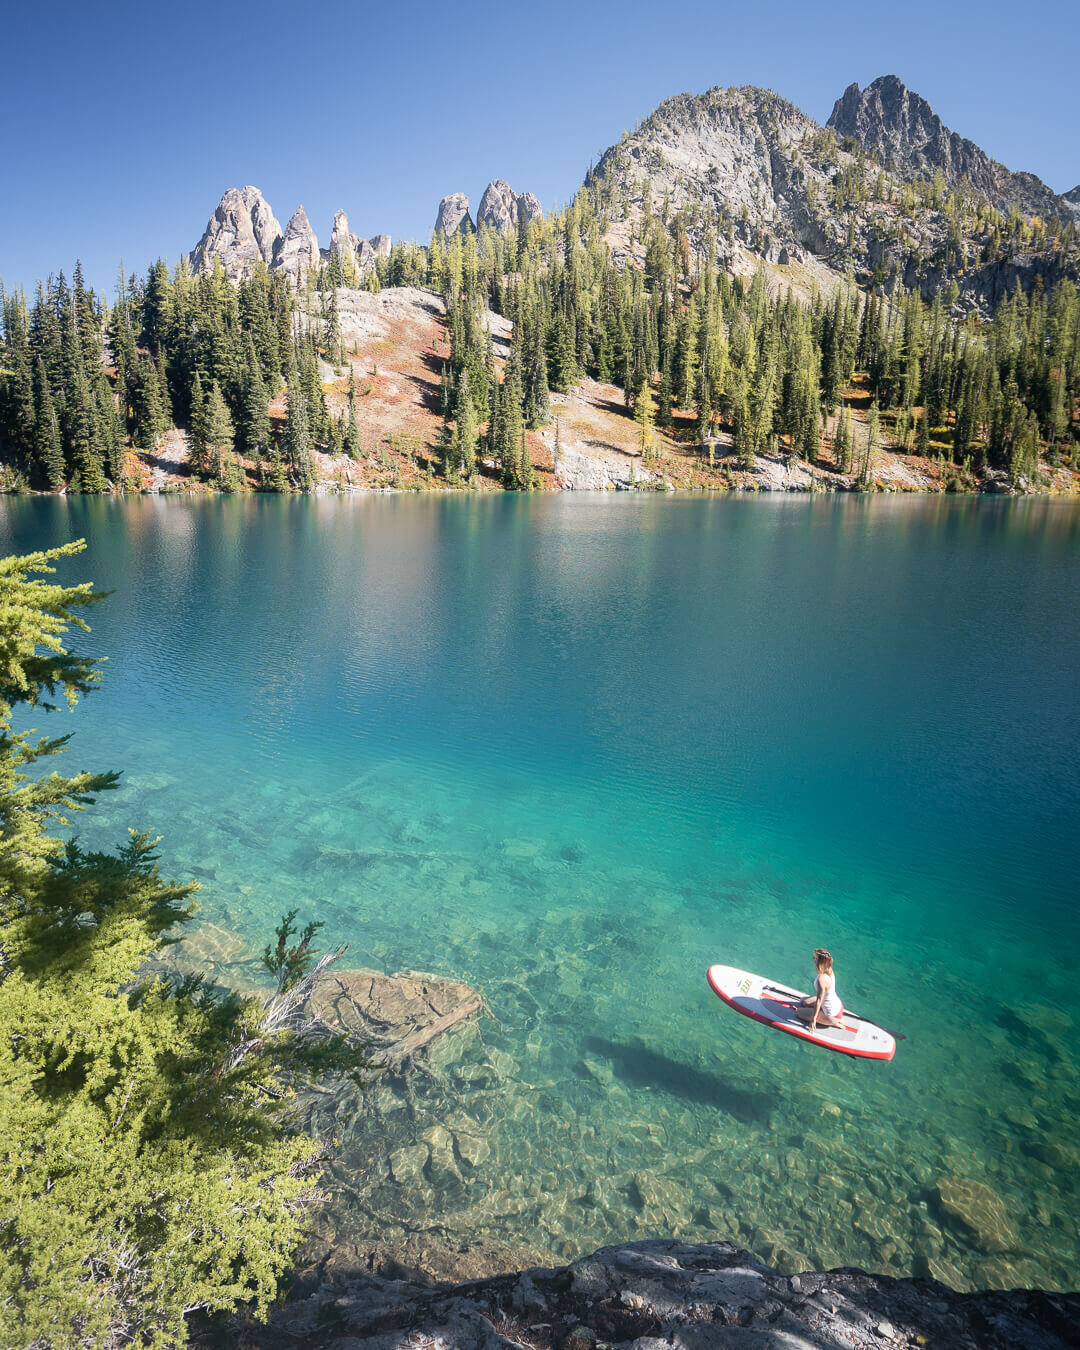 Paddle boarding on Blue Lake in the North Cascades.